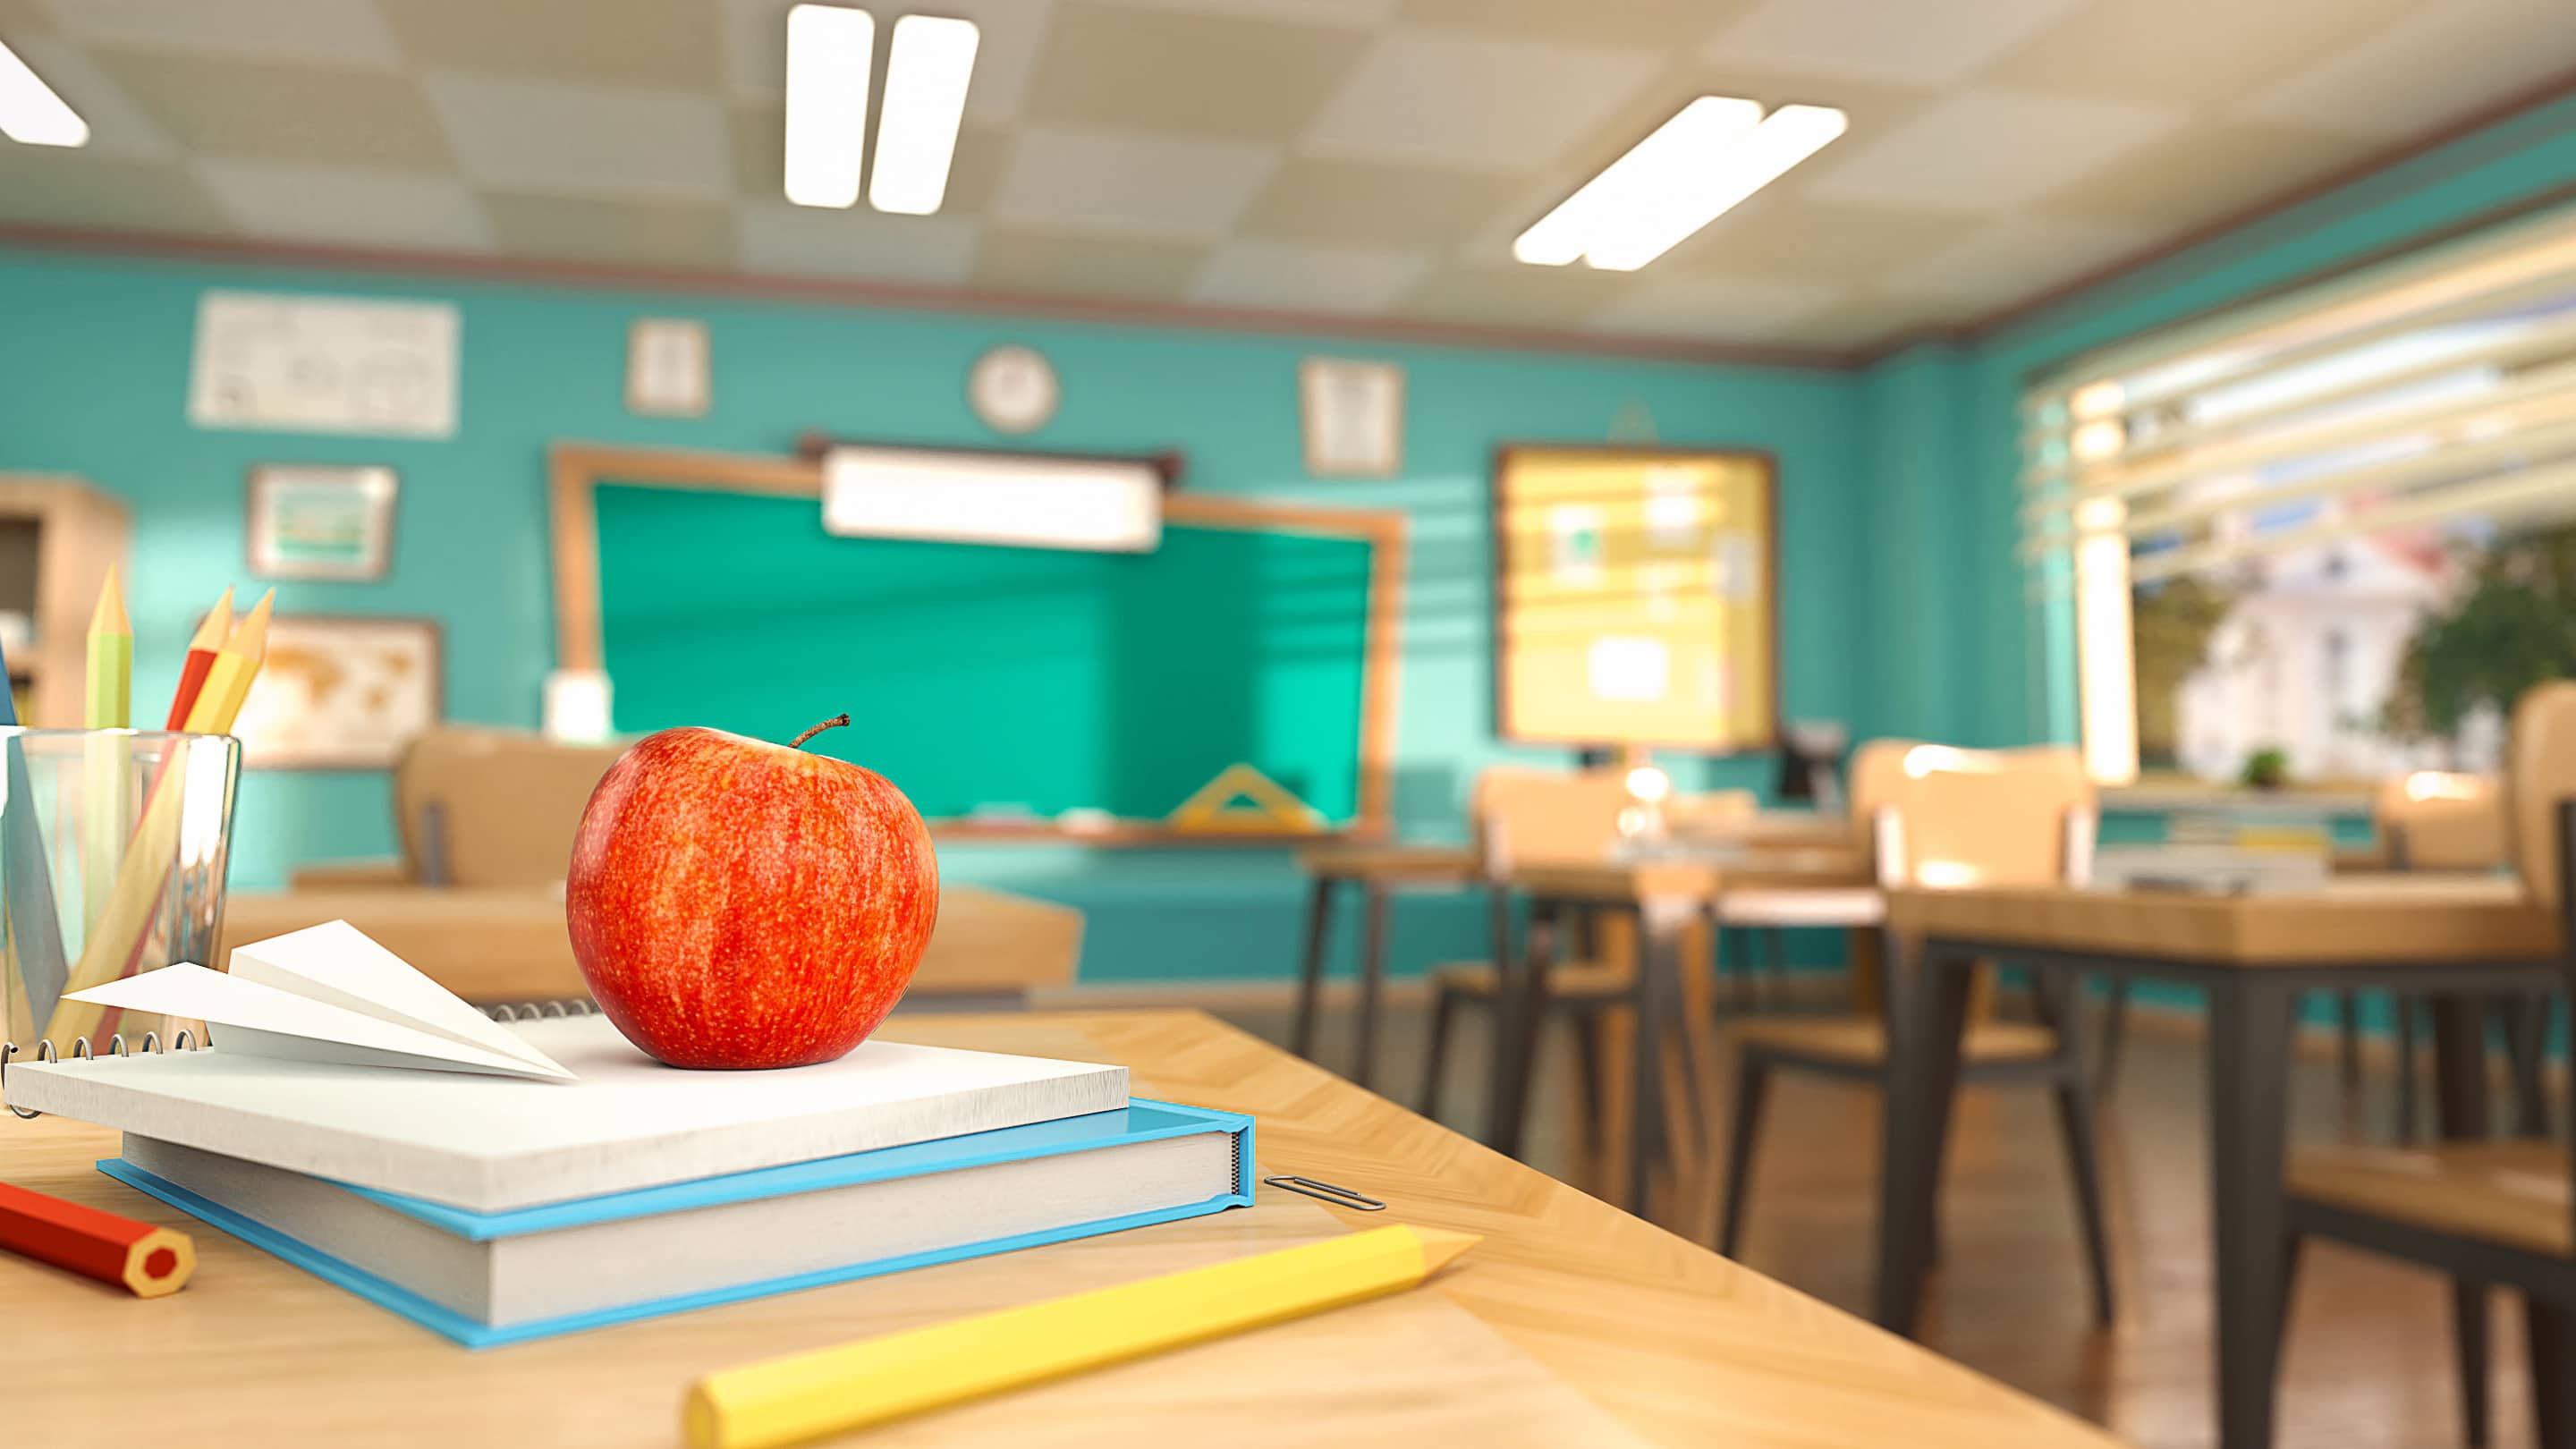 Cartoon style school elements - book, pen, pencils and red apple on desk in empty classroom closed on qurantine covid-19. 3D rendering illustration. Back to school design template.